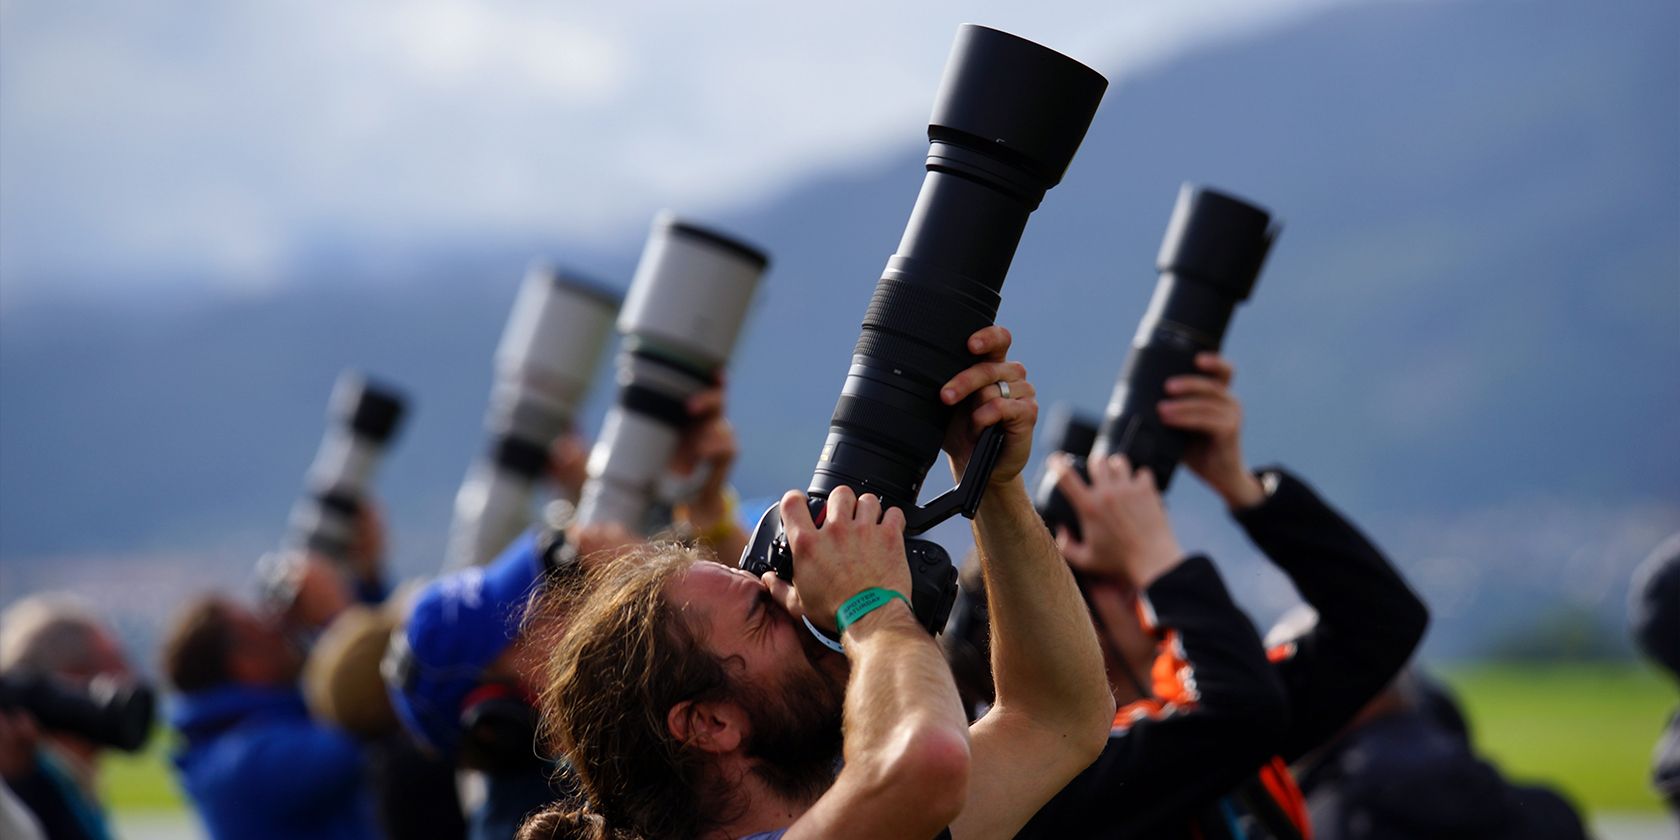 A group of photographers using long lenses